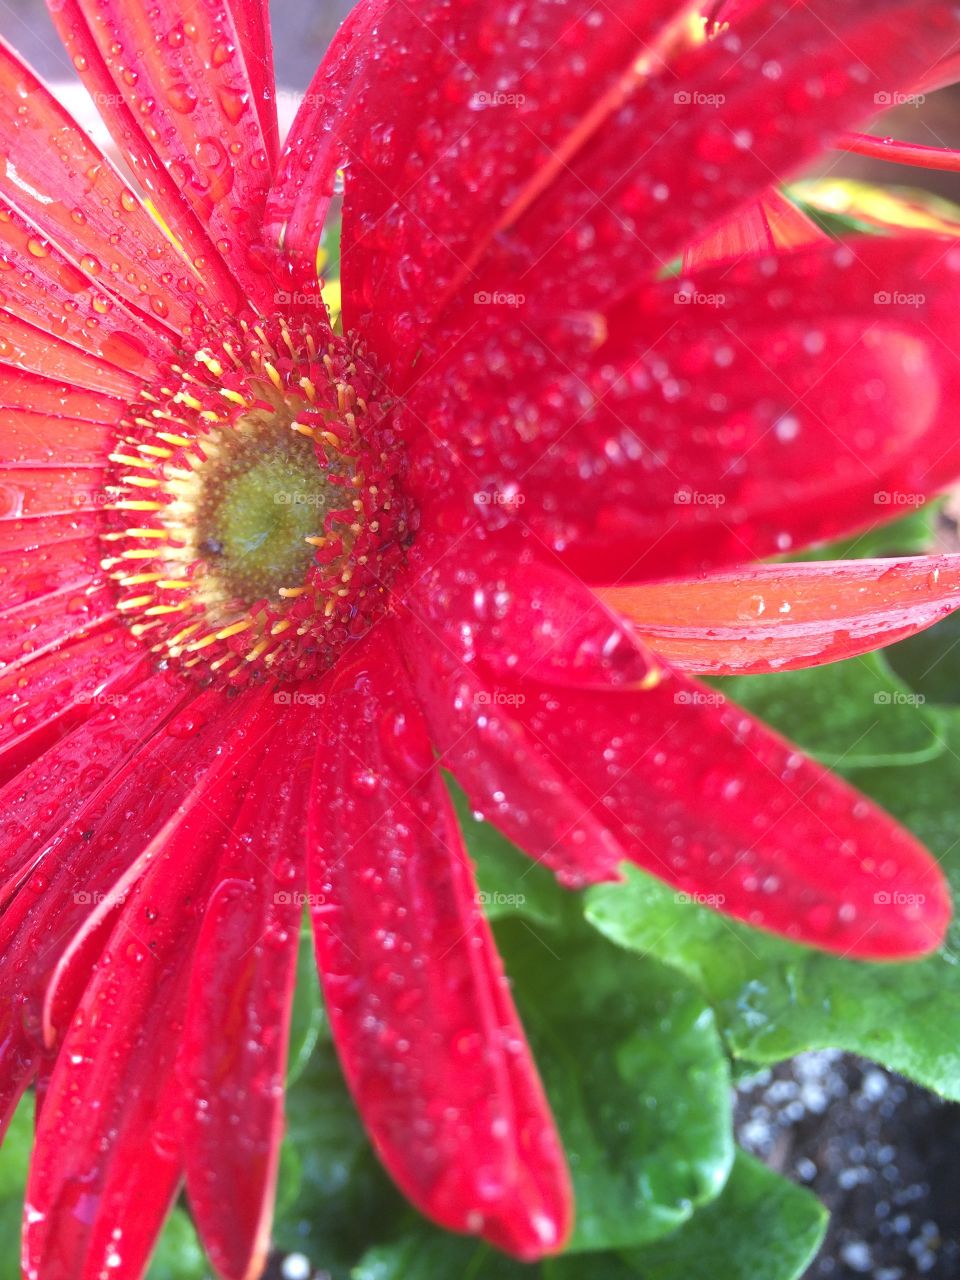 Beautiful light facing this bright daisy after it rained giving it a natural glow